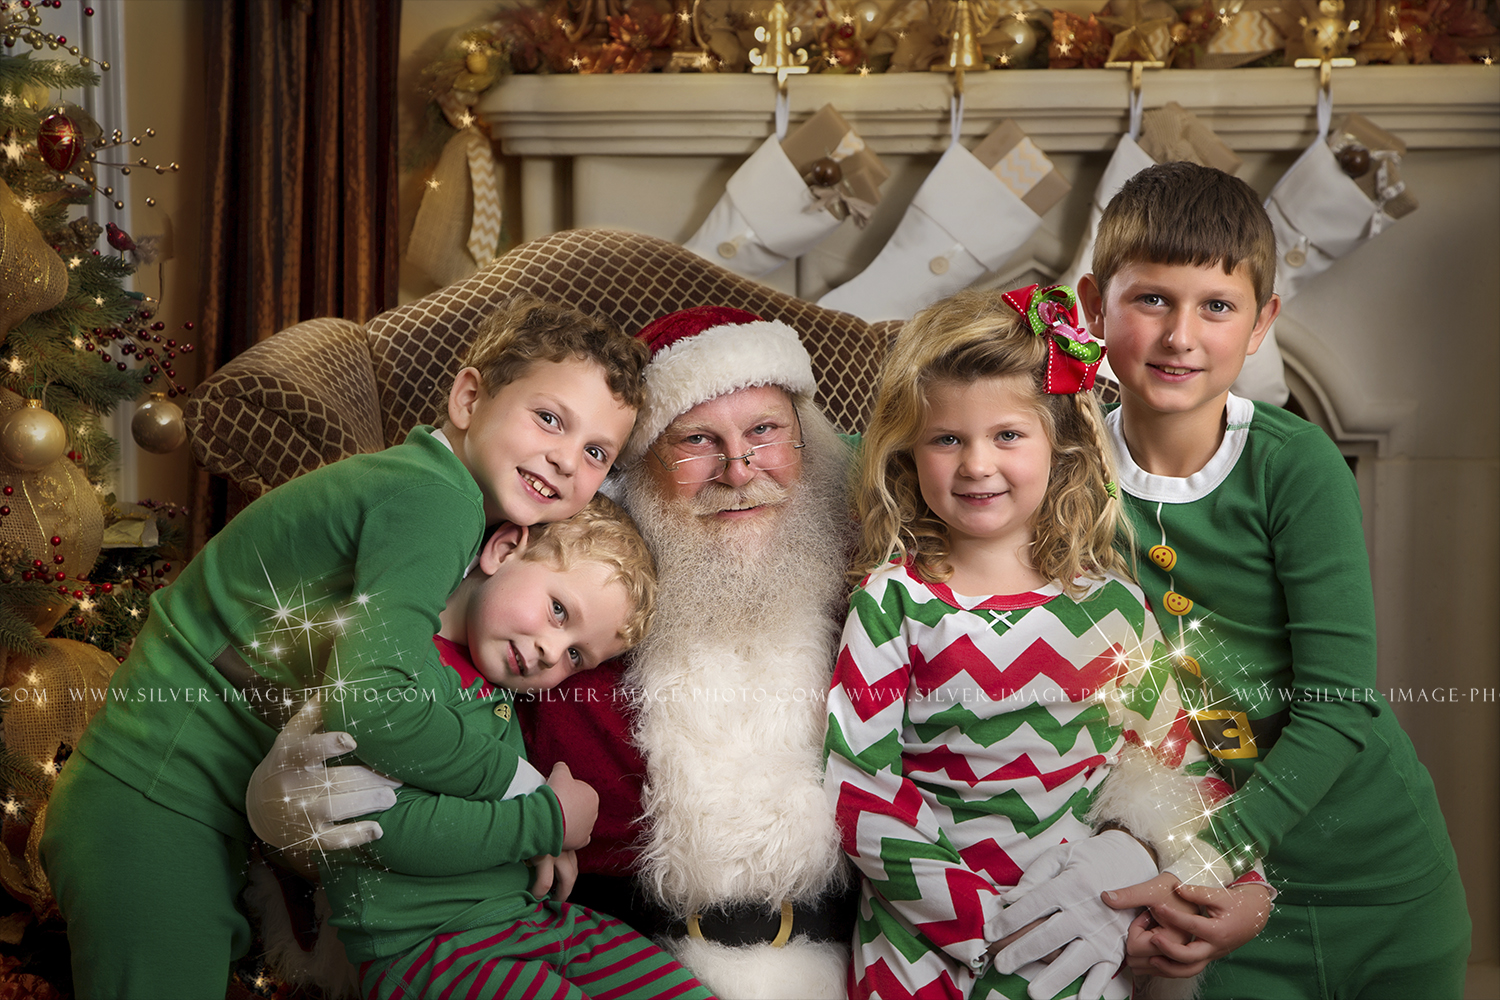 Silver Image Photography - Real bearded Santa photos in Spring, TX https://www.silver-image-photo.com 